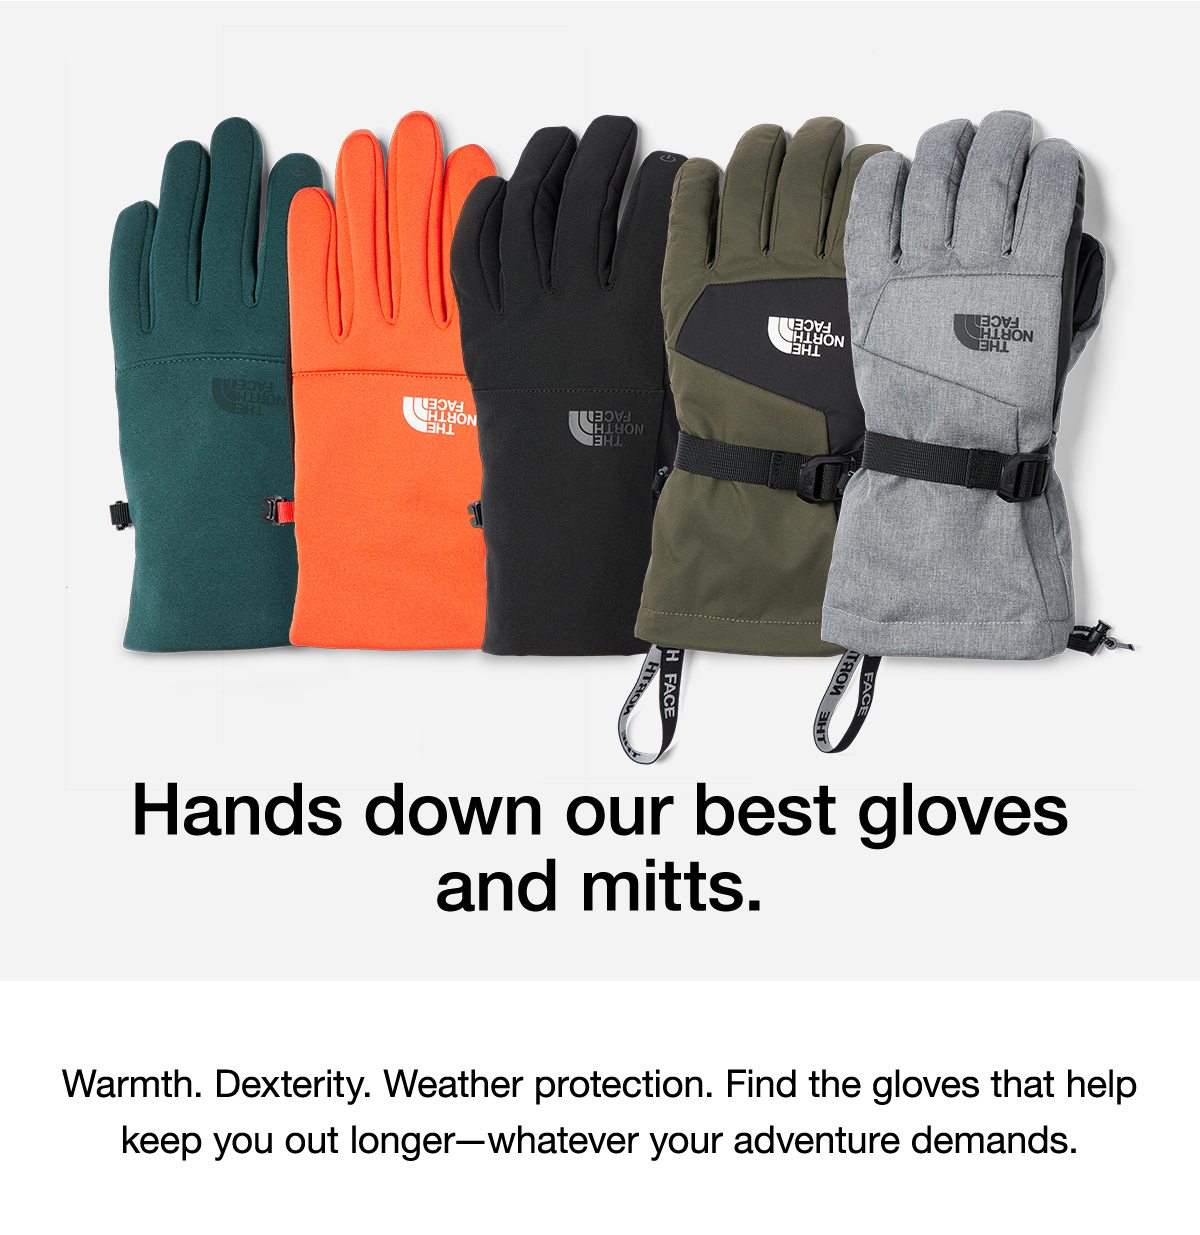 Hands down our best gloves and mitts.